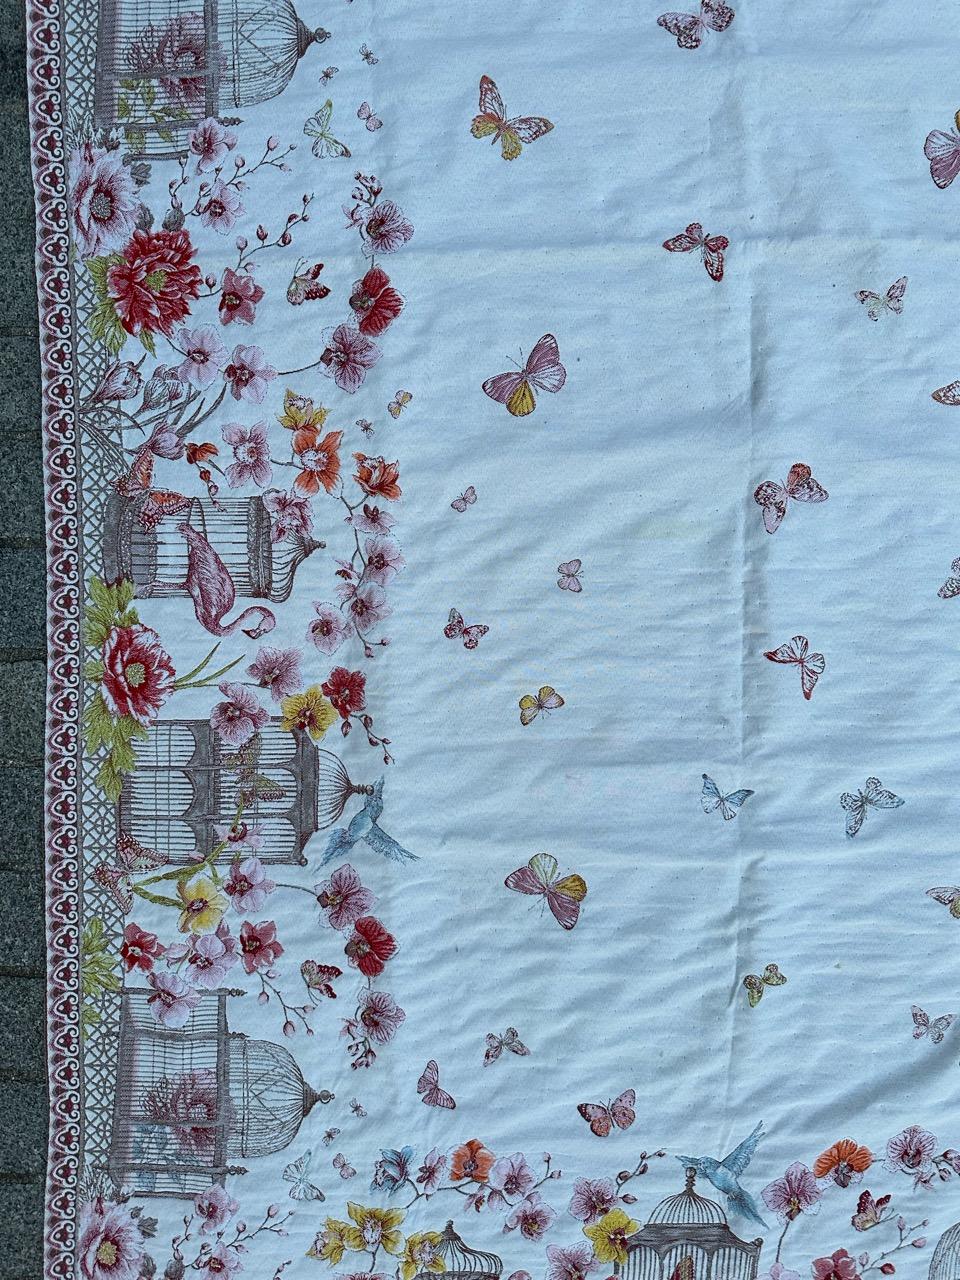 Pretty vintage French Aubusson style tapestry or bed cover or tablecloth, with beautiful floral design and nice light colors, woven with mechanical Jaquar manufacturing with wool and cotton.

✨✨✨
